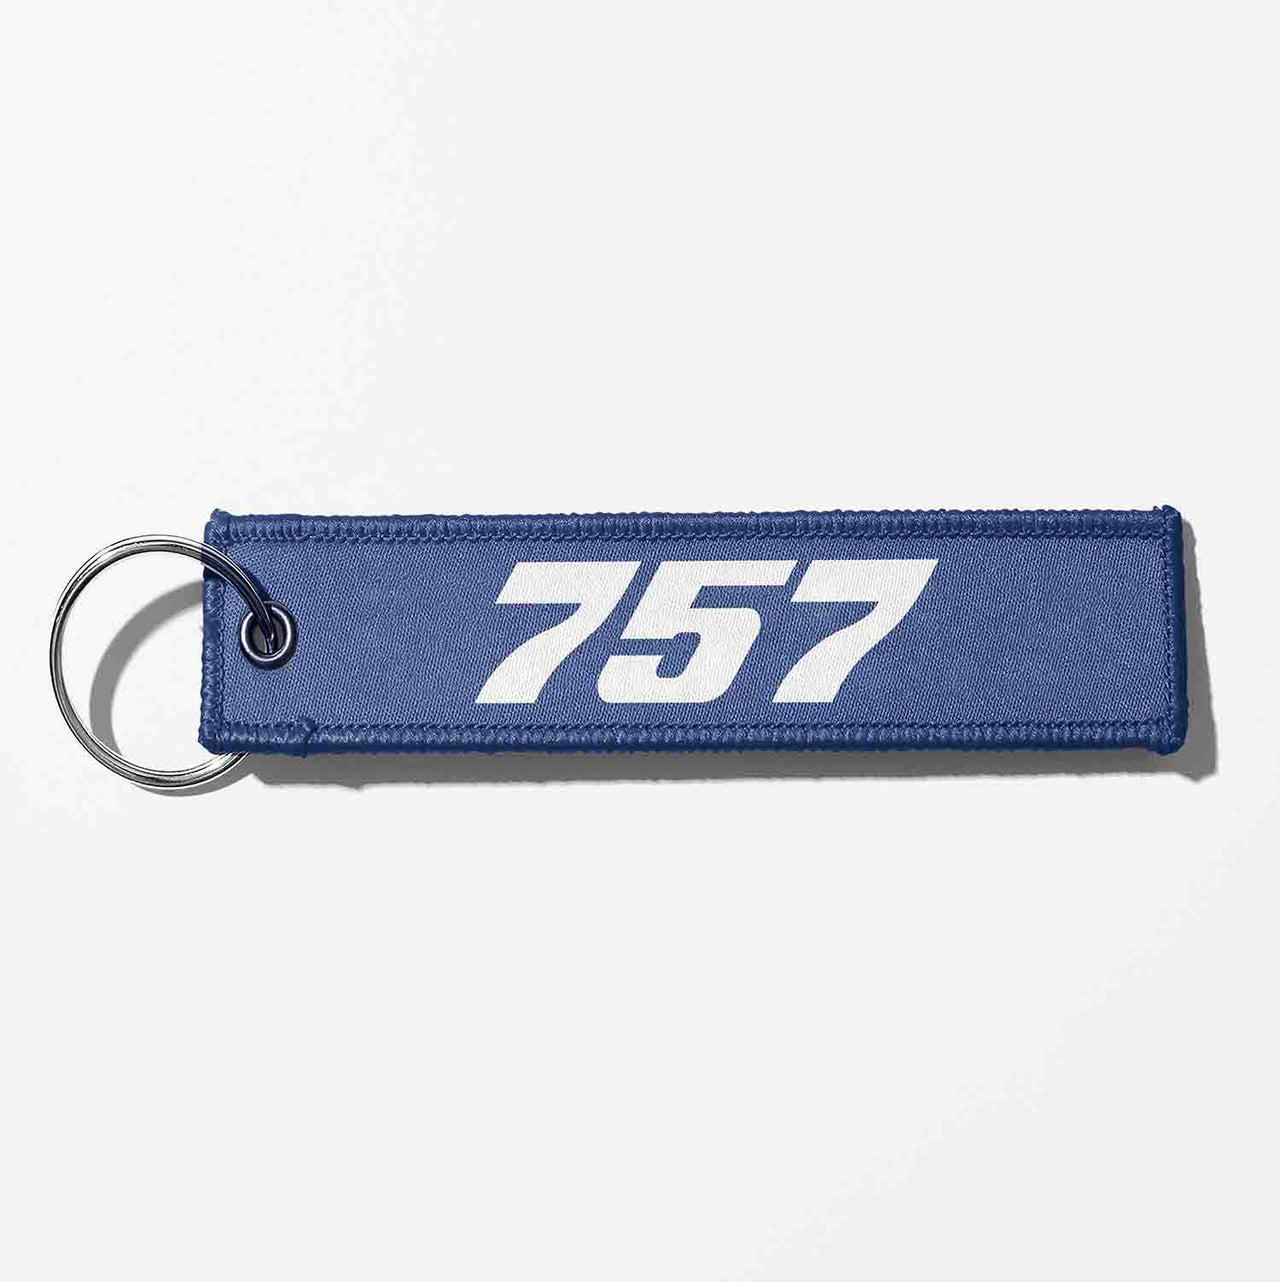 Boeing 757 Flat Text Designed Key Chains